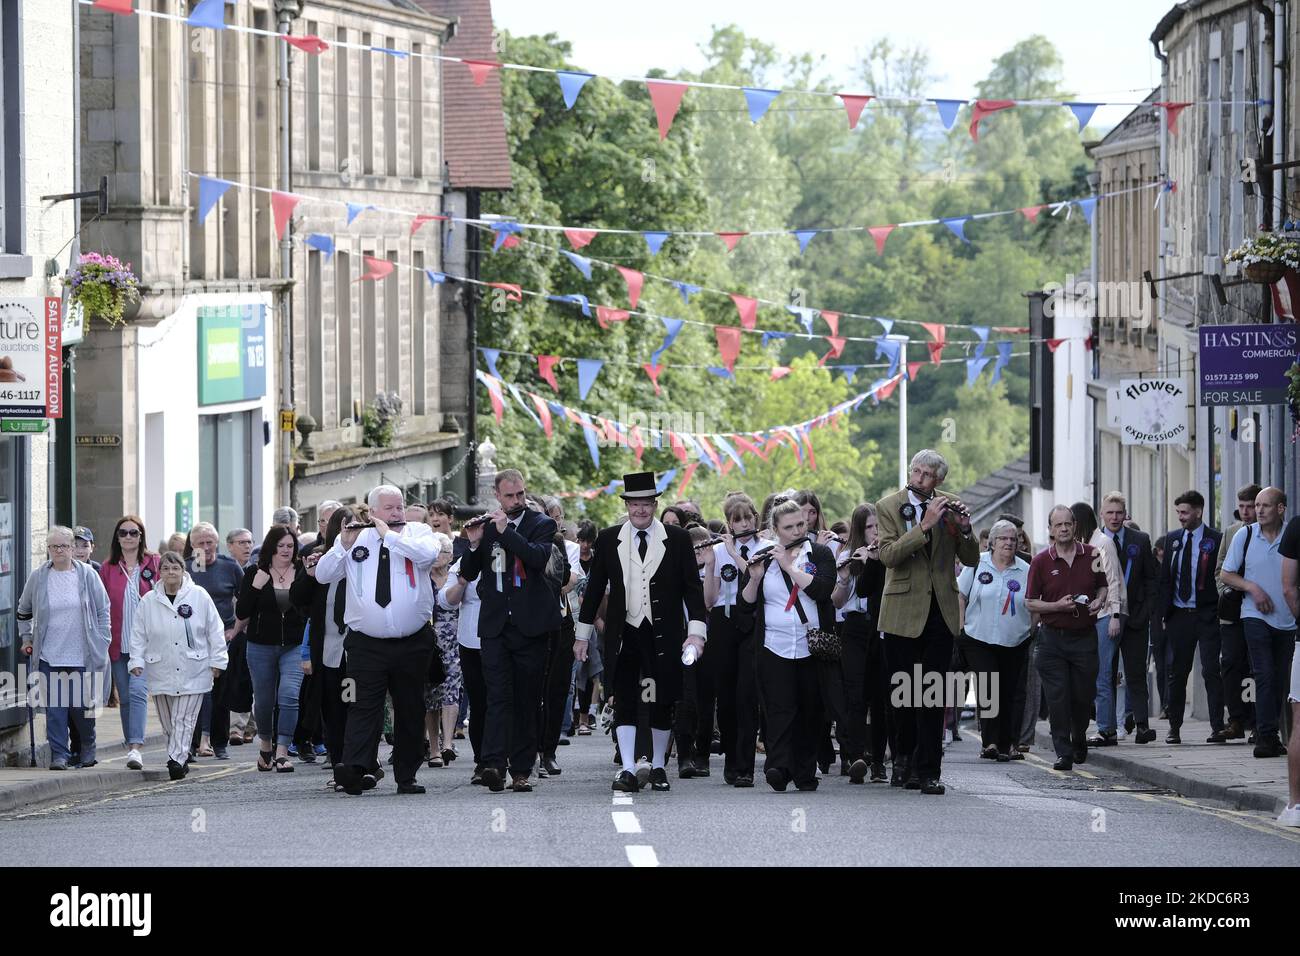 Selkirk, UK. 16.Jun.2022. Selkirk Common Riding 2022. Thursday, The Night afore the Morn. Senior Burgh Officer, Mr Graeme Bell led by the Flute band, preambles the streets starting in the West Port, at 1830hrs, stopping at significant junctions while walking a circuit of the Market Place, High Street, Back Row, Kirk Wynd for the Crying of the Burley and then onwards to the Victoria Halls, for the United Crafts Colour Bussin. At 2000hrs during the proceedings the Selkirk Ex-Royal Burgh Standard Bearers form up in a parade to march to the 'Fletcher Memorial' and lay a wreath and mark respects fo Stock Photo